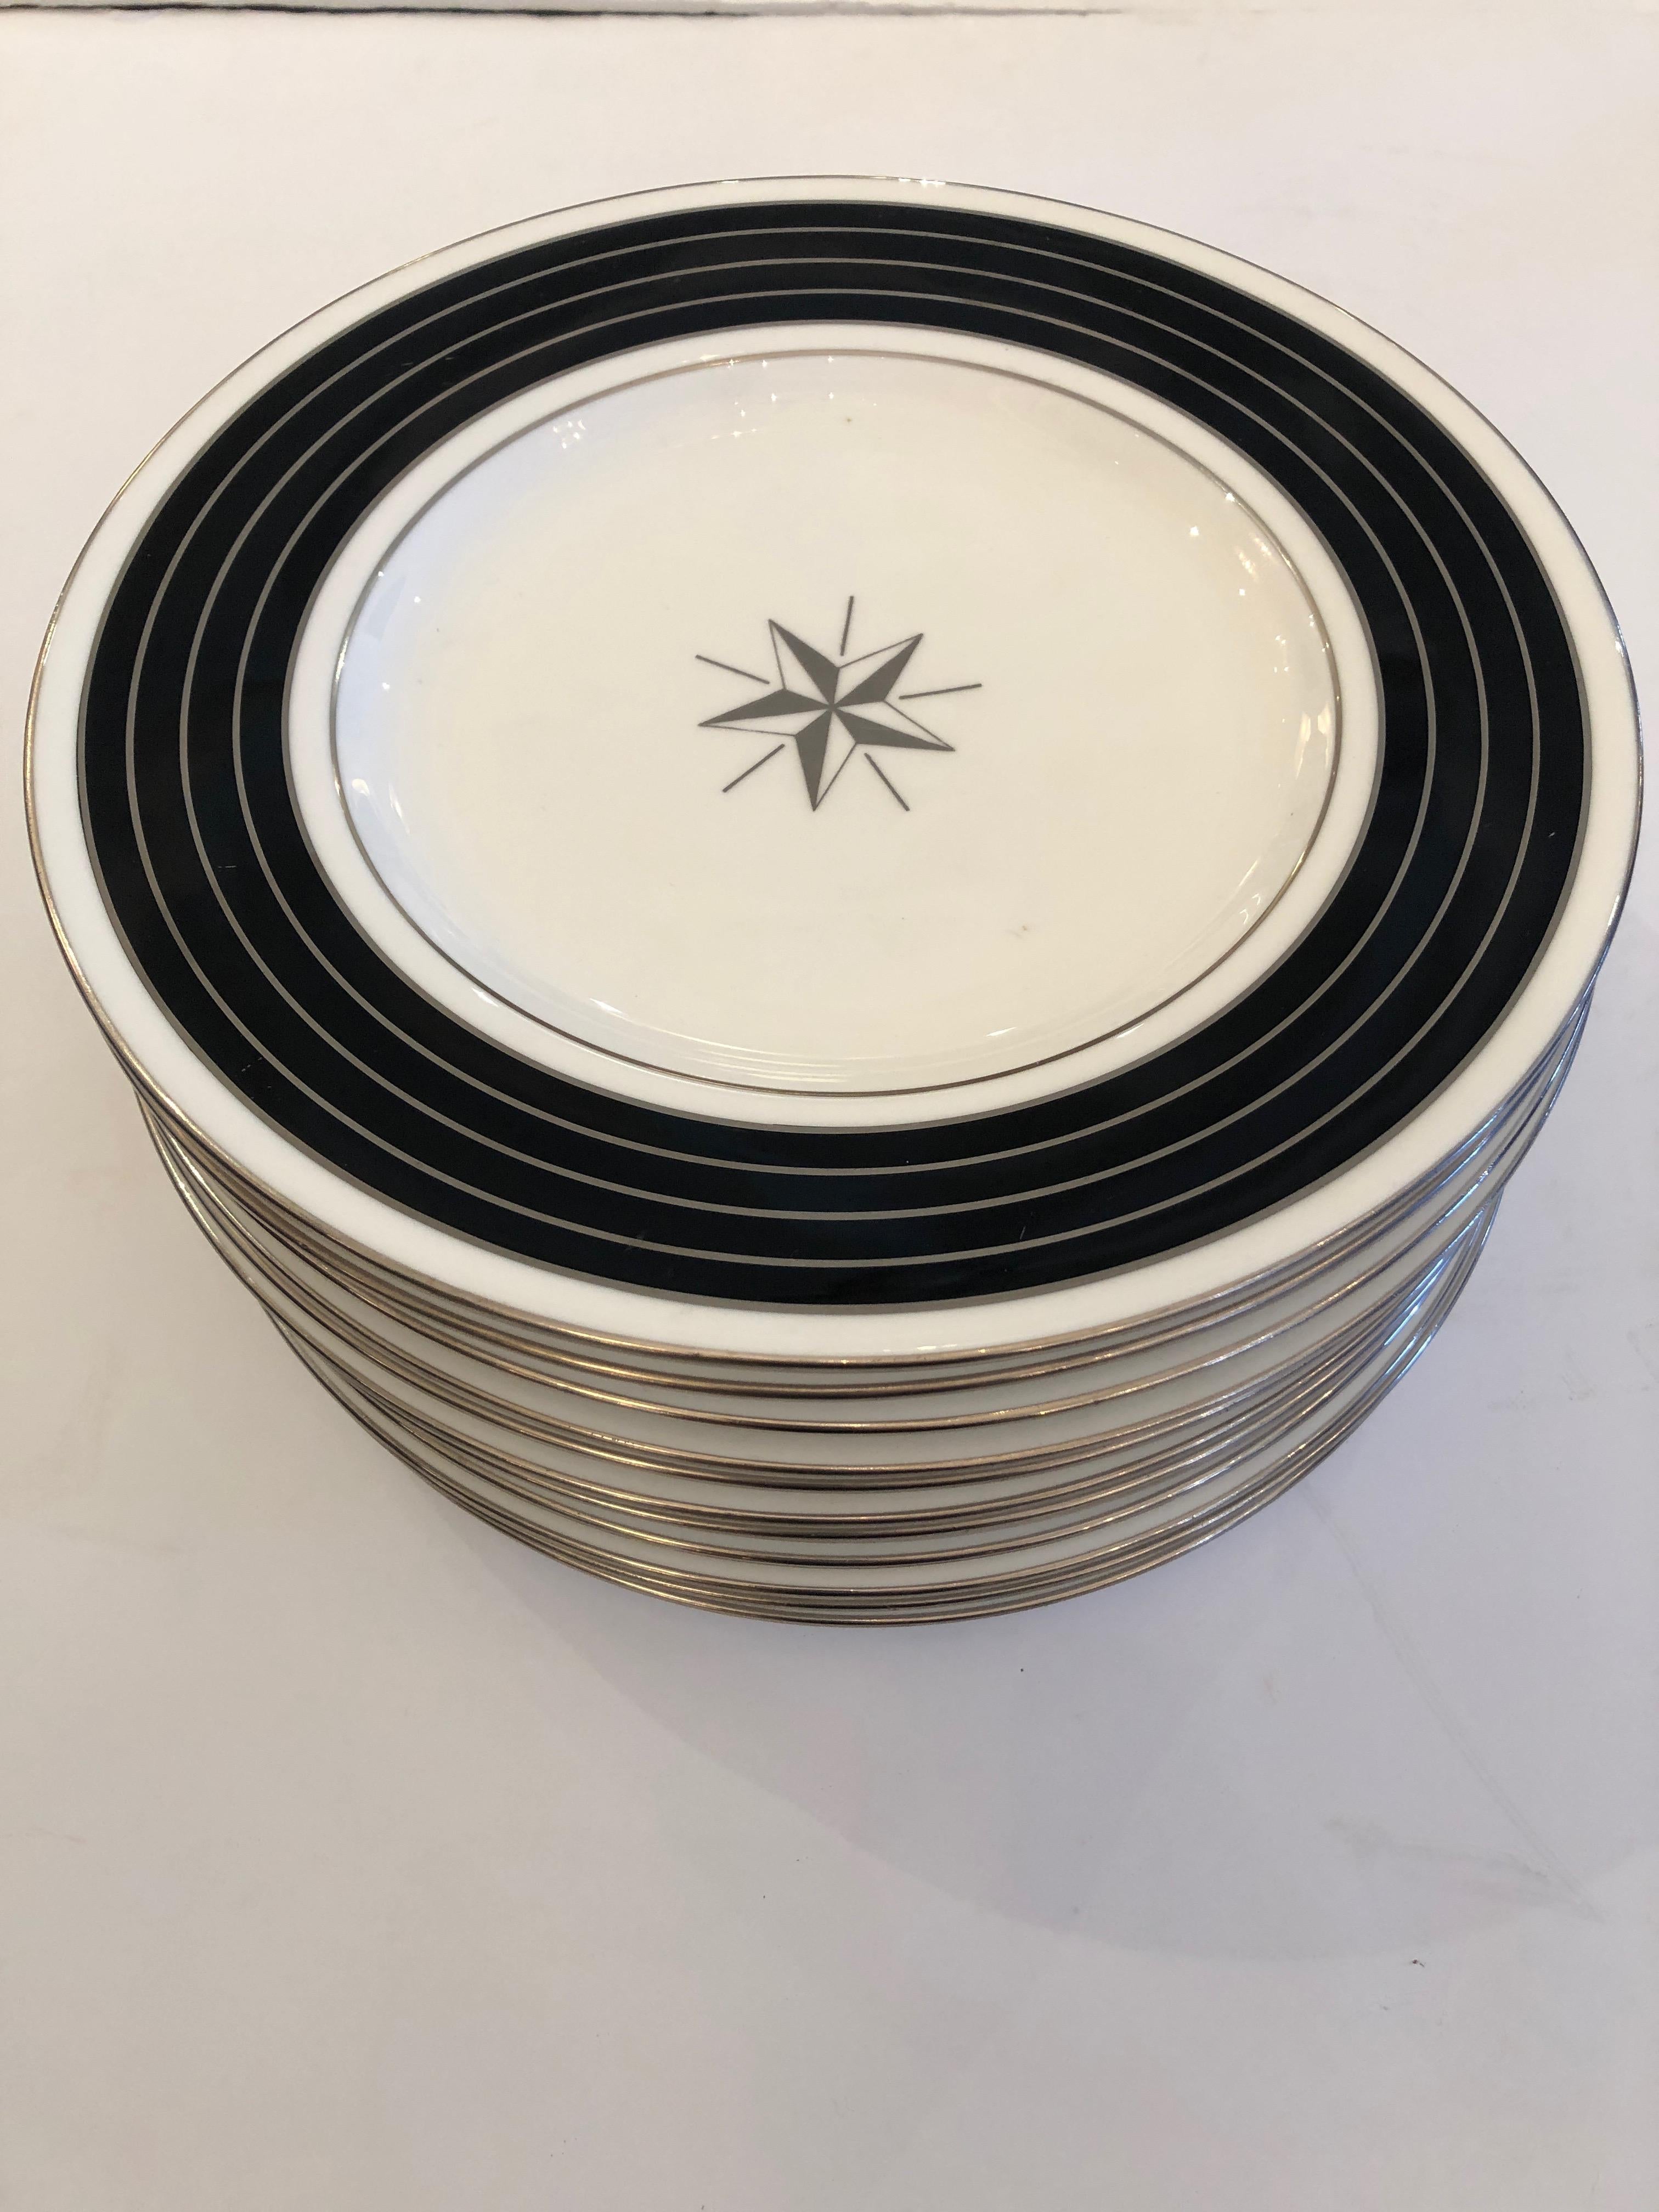 English Sublime Set of 12 Minton Dinner or Service Plates